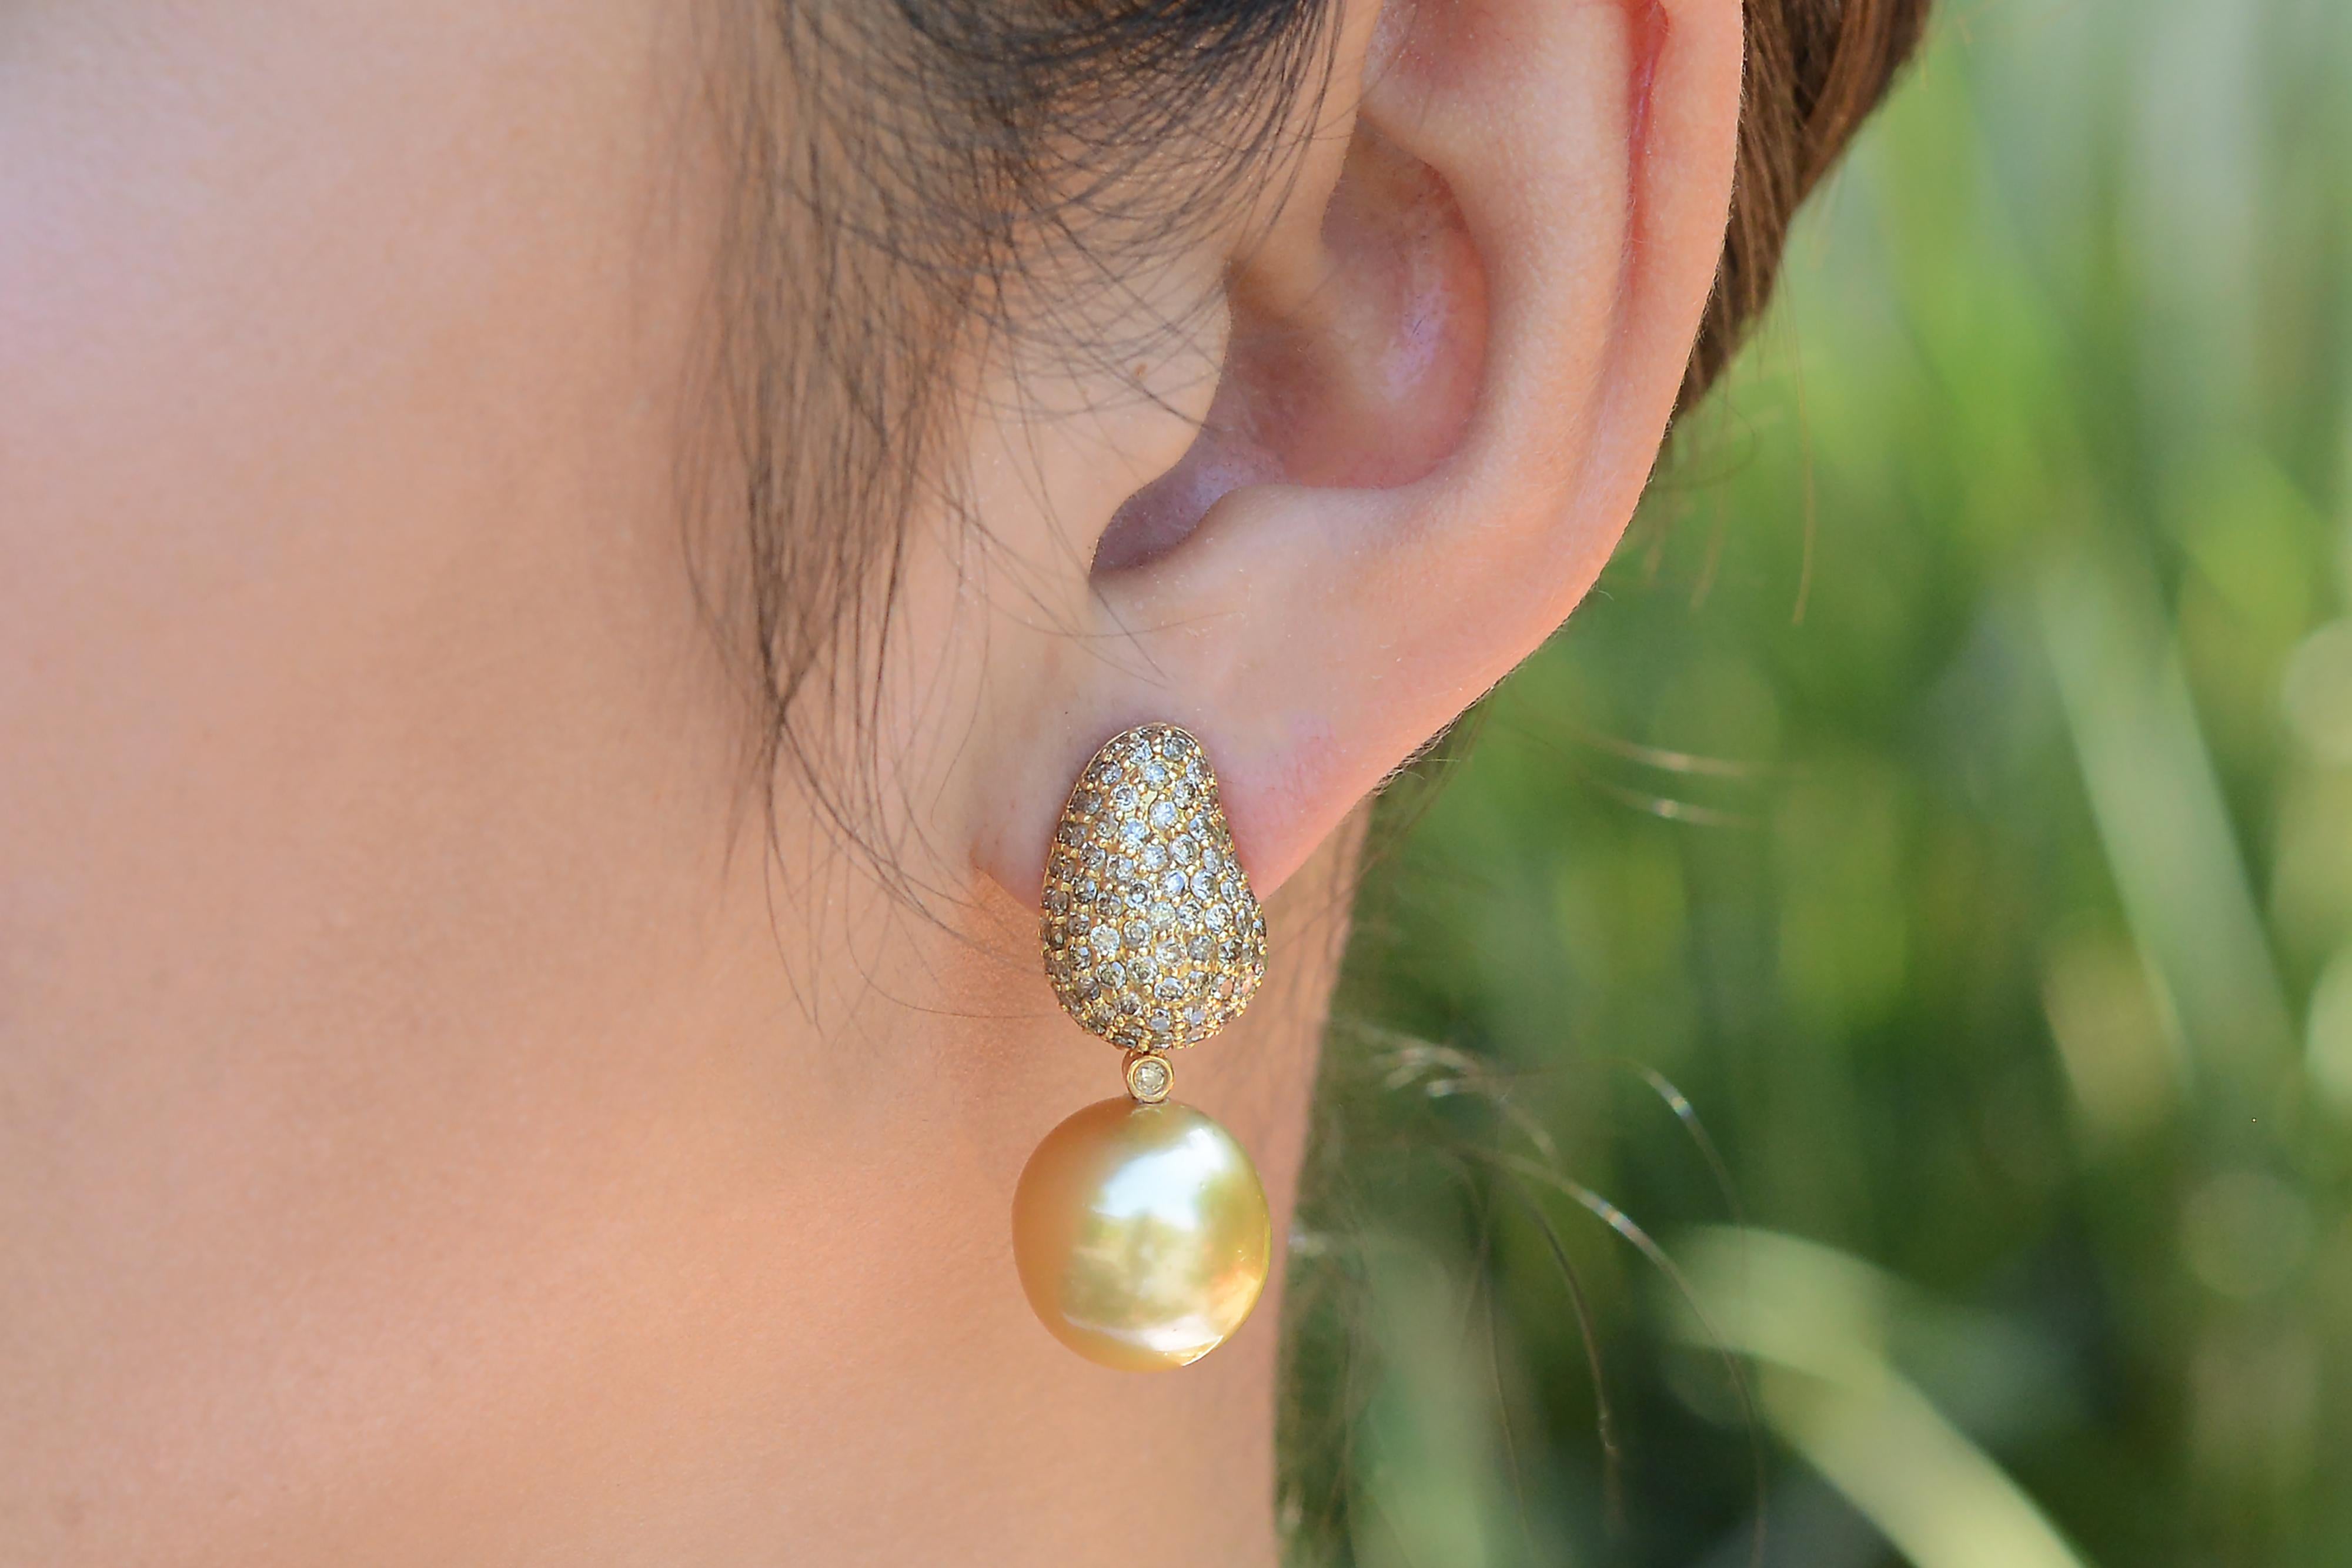 Dangling beneath are a pair of perfectly sun-kissed natural colored golden South Sea pearls suspended by a single bezel set diamond. Their depth of color, luster, size and complexion are top-notch, AAA grade. These convertible drop earrings are a